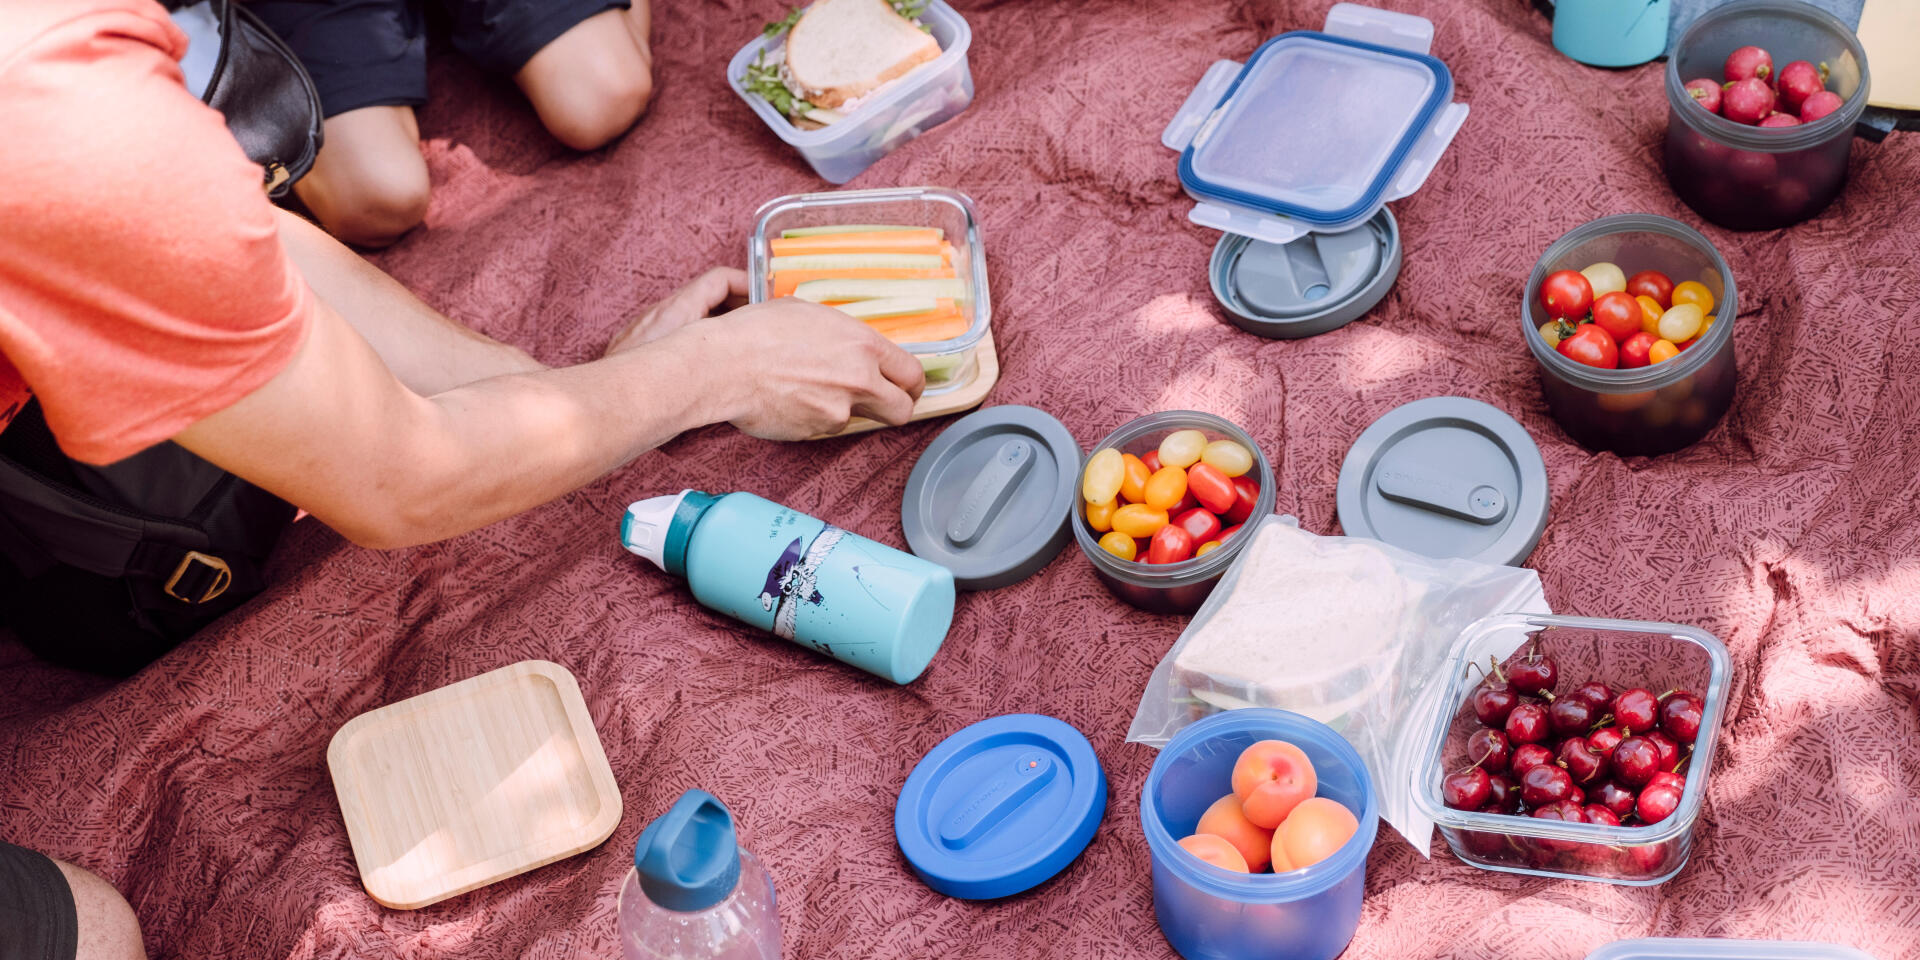 What to eat for a picnic?